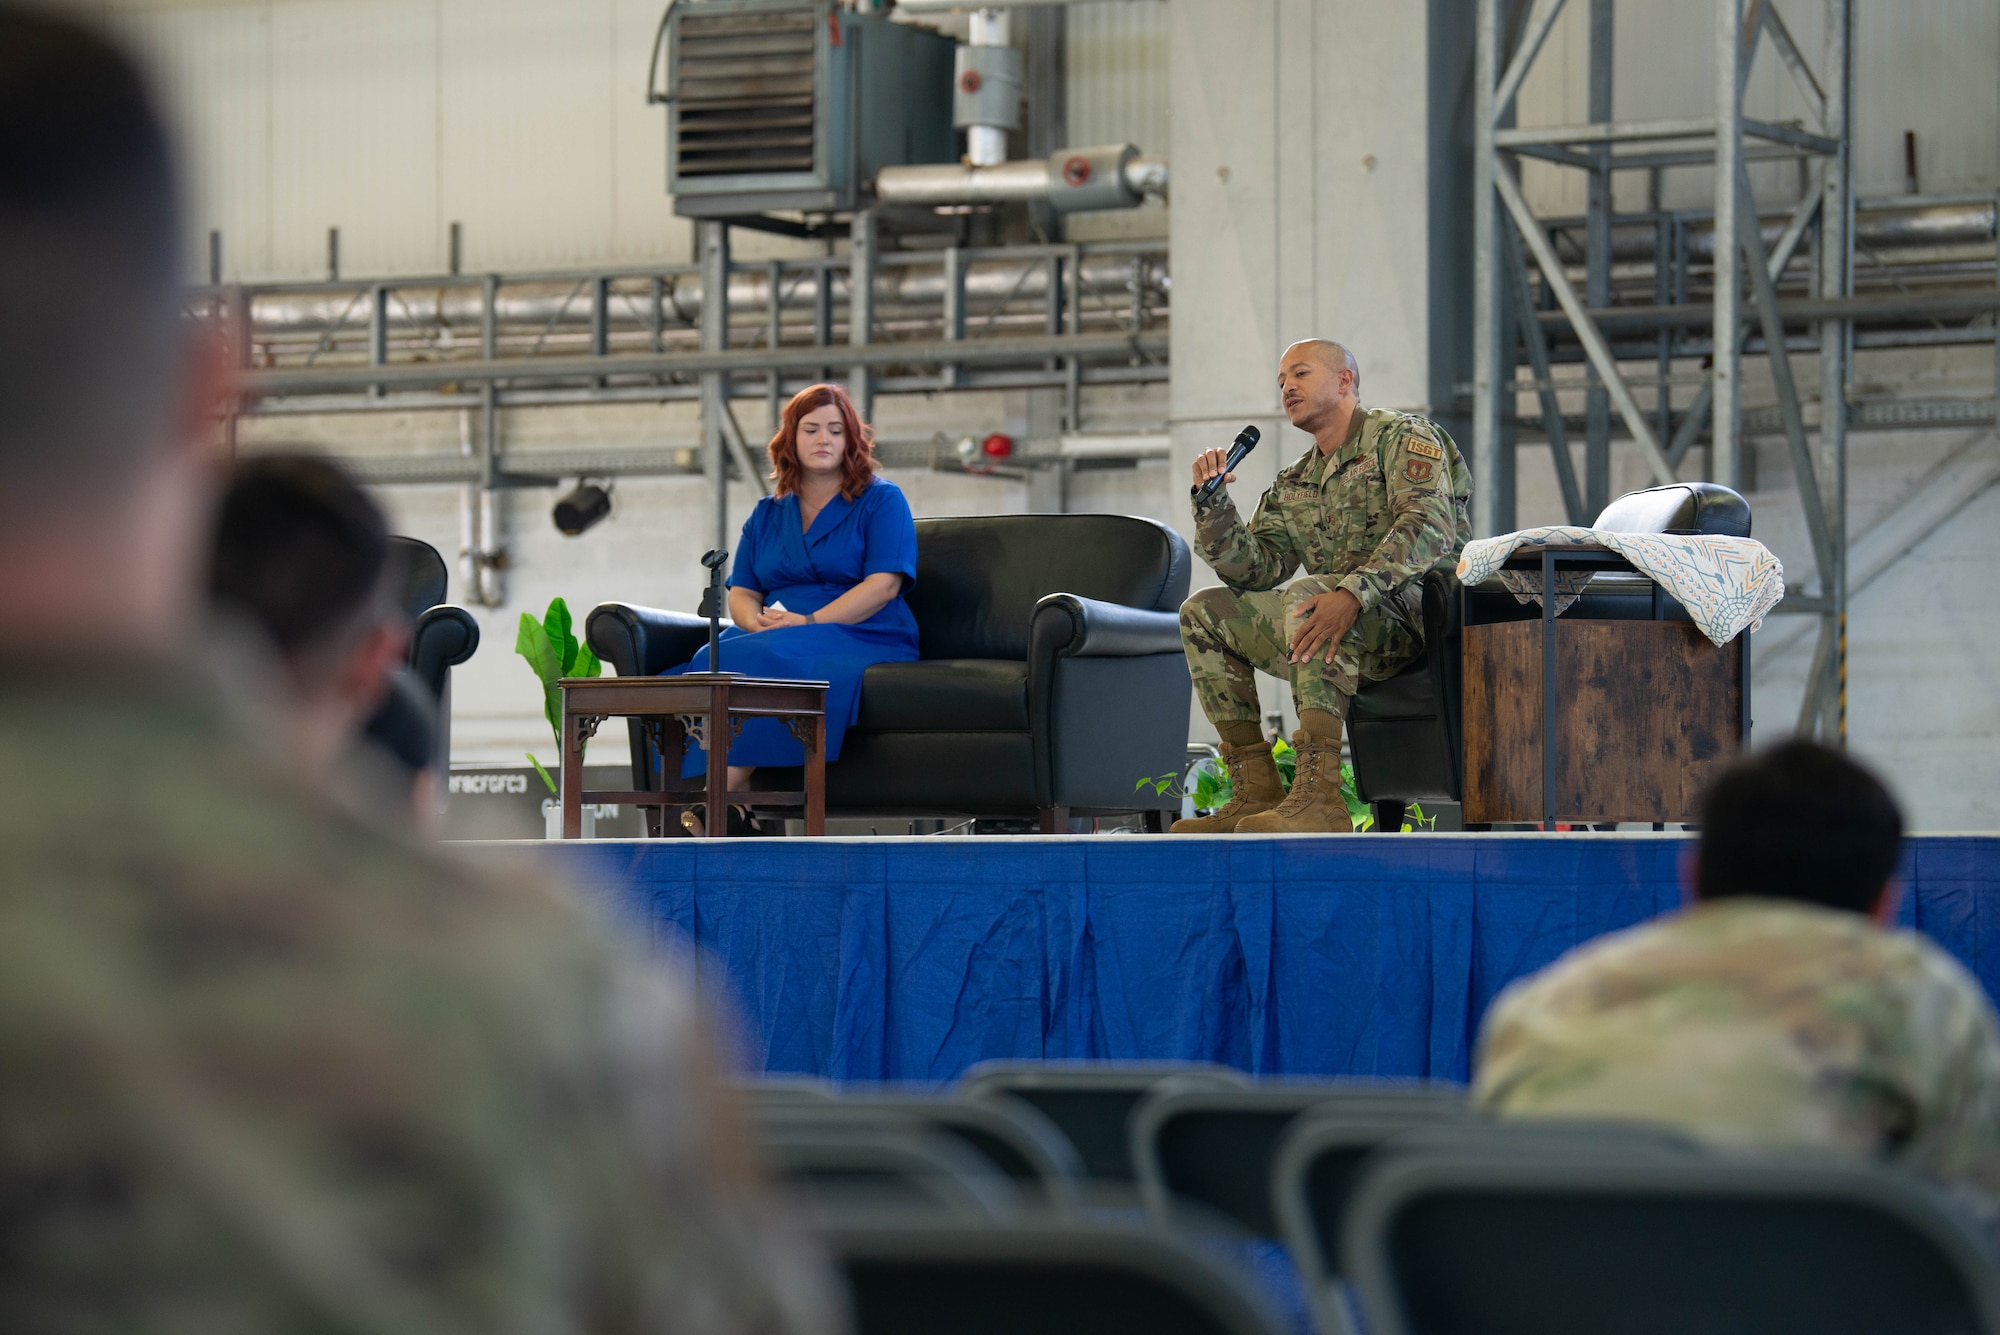 An Airman shares his story during a storytellers event